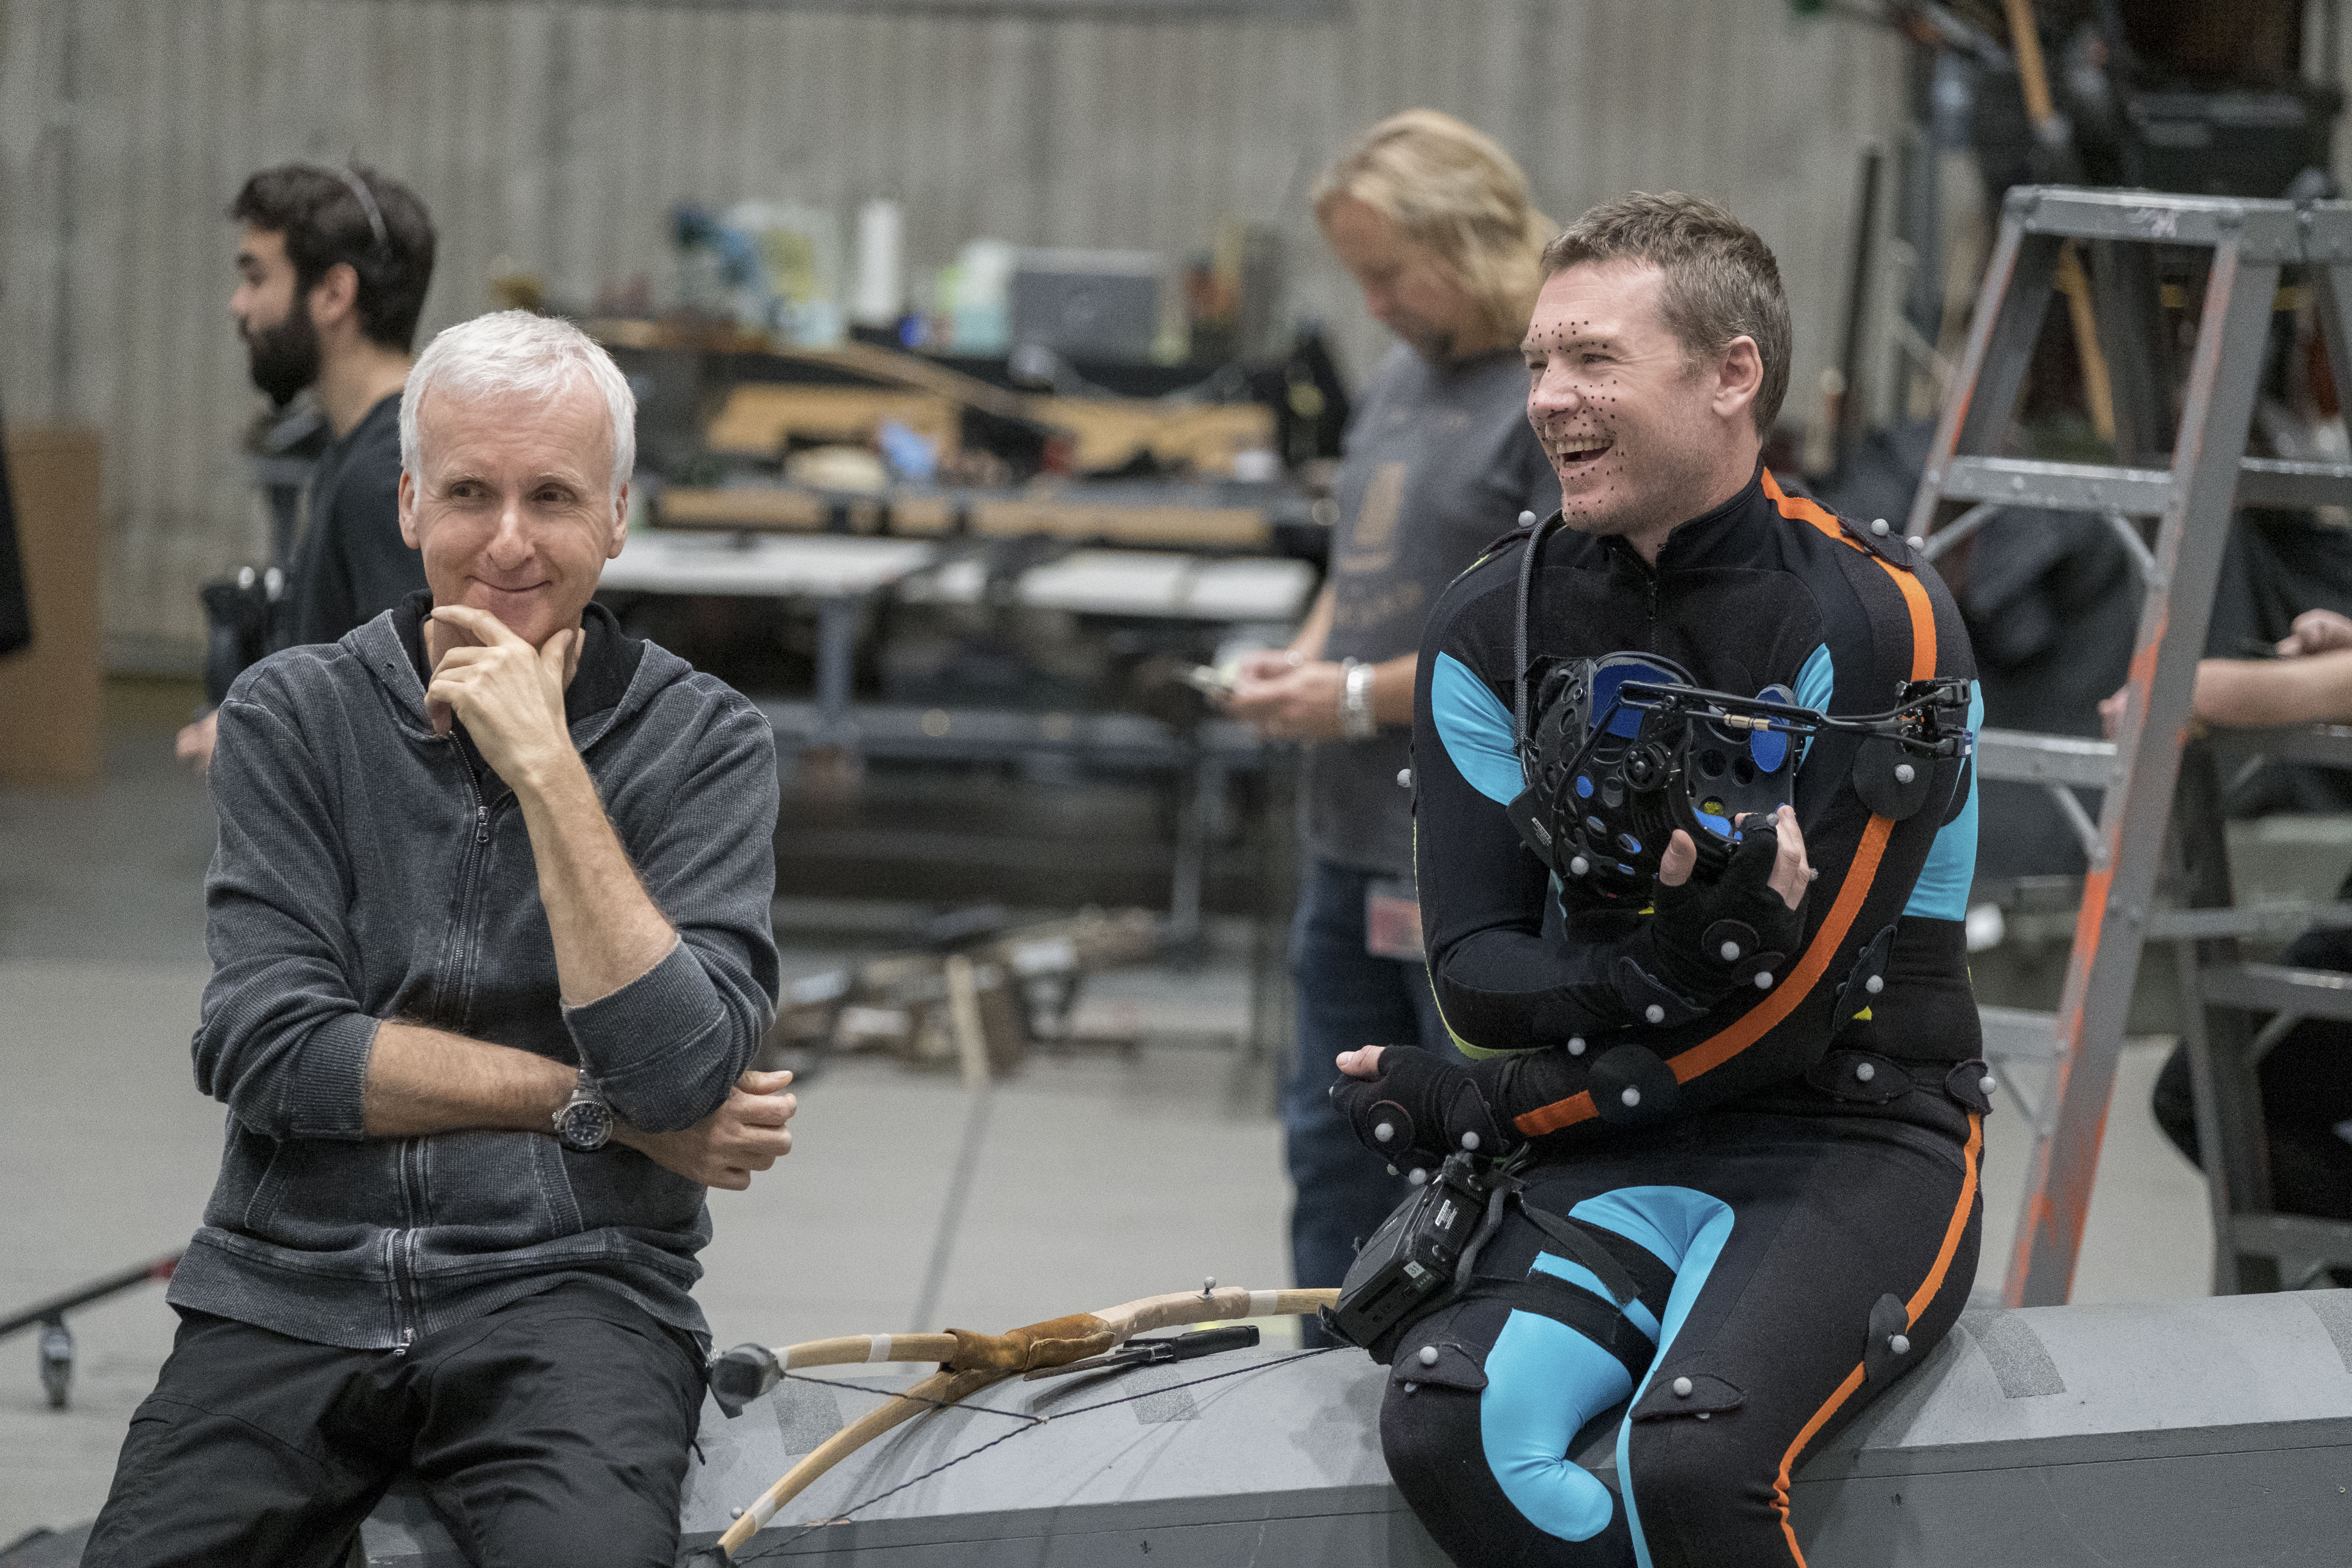 James Cameron Cursed at Fox Exec Who Wanted 'Avatar' Shorter Runtime